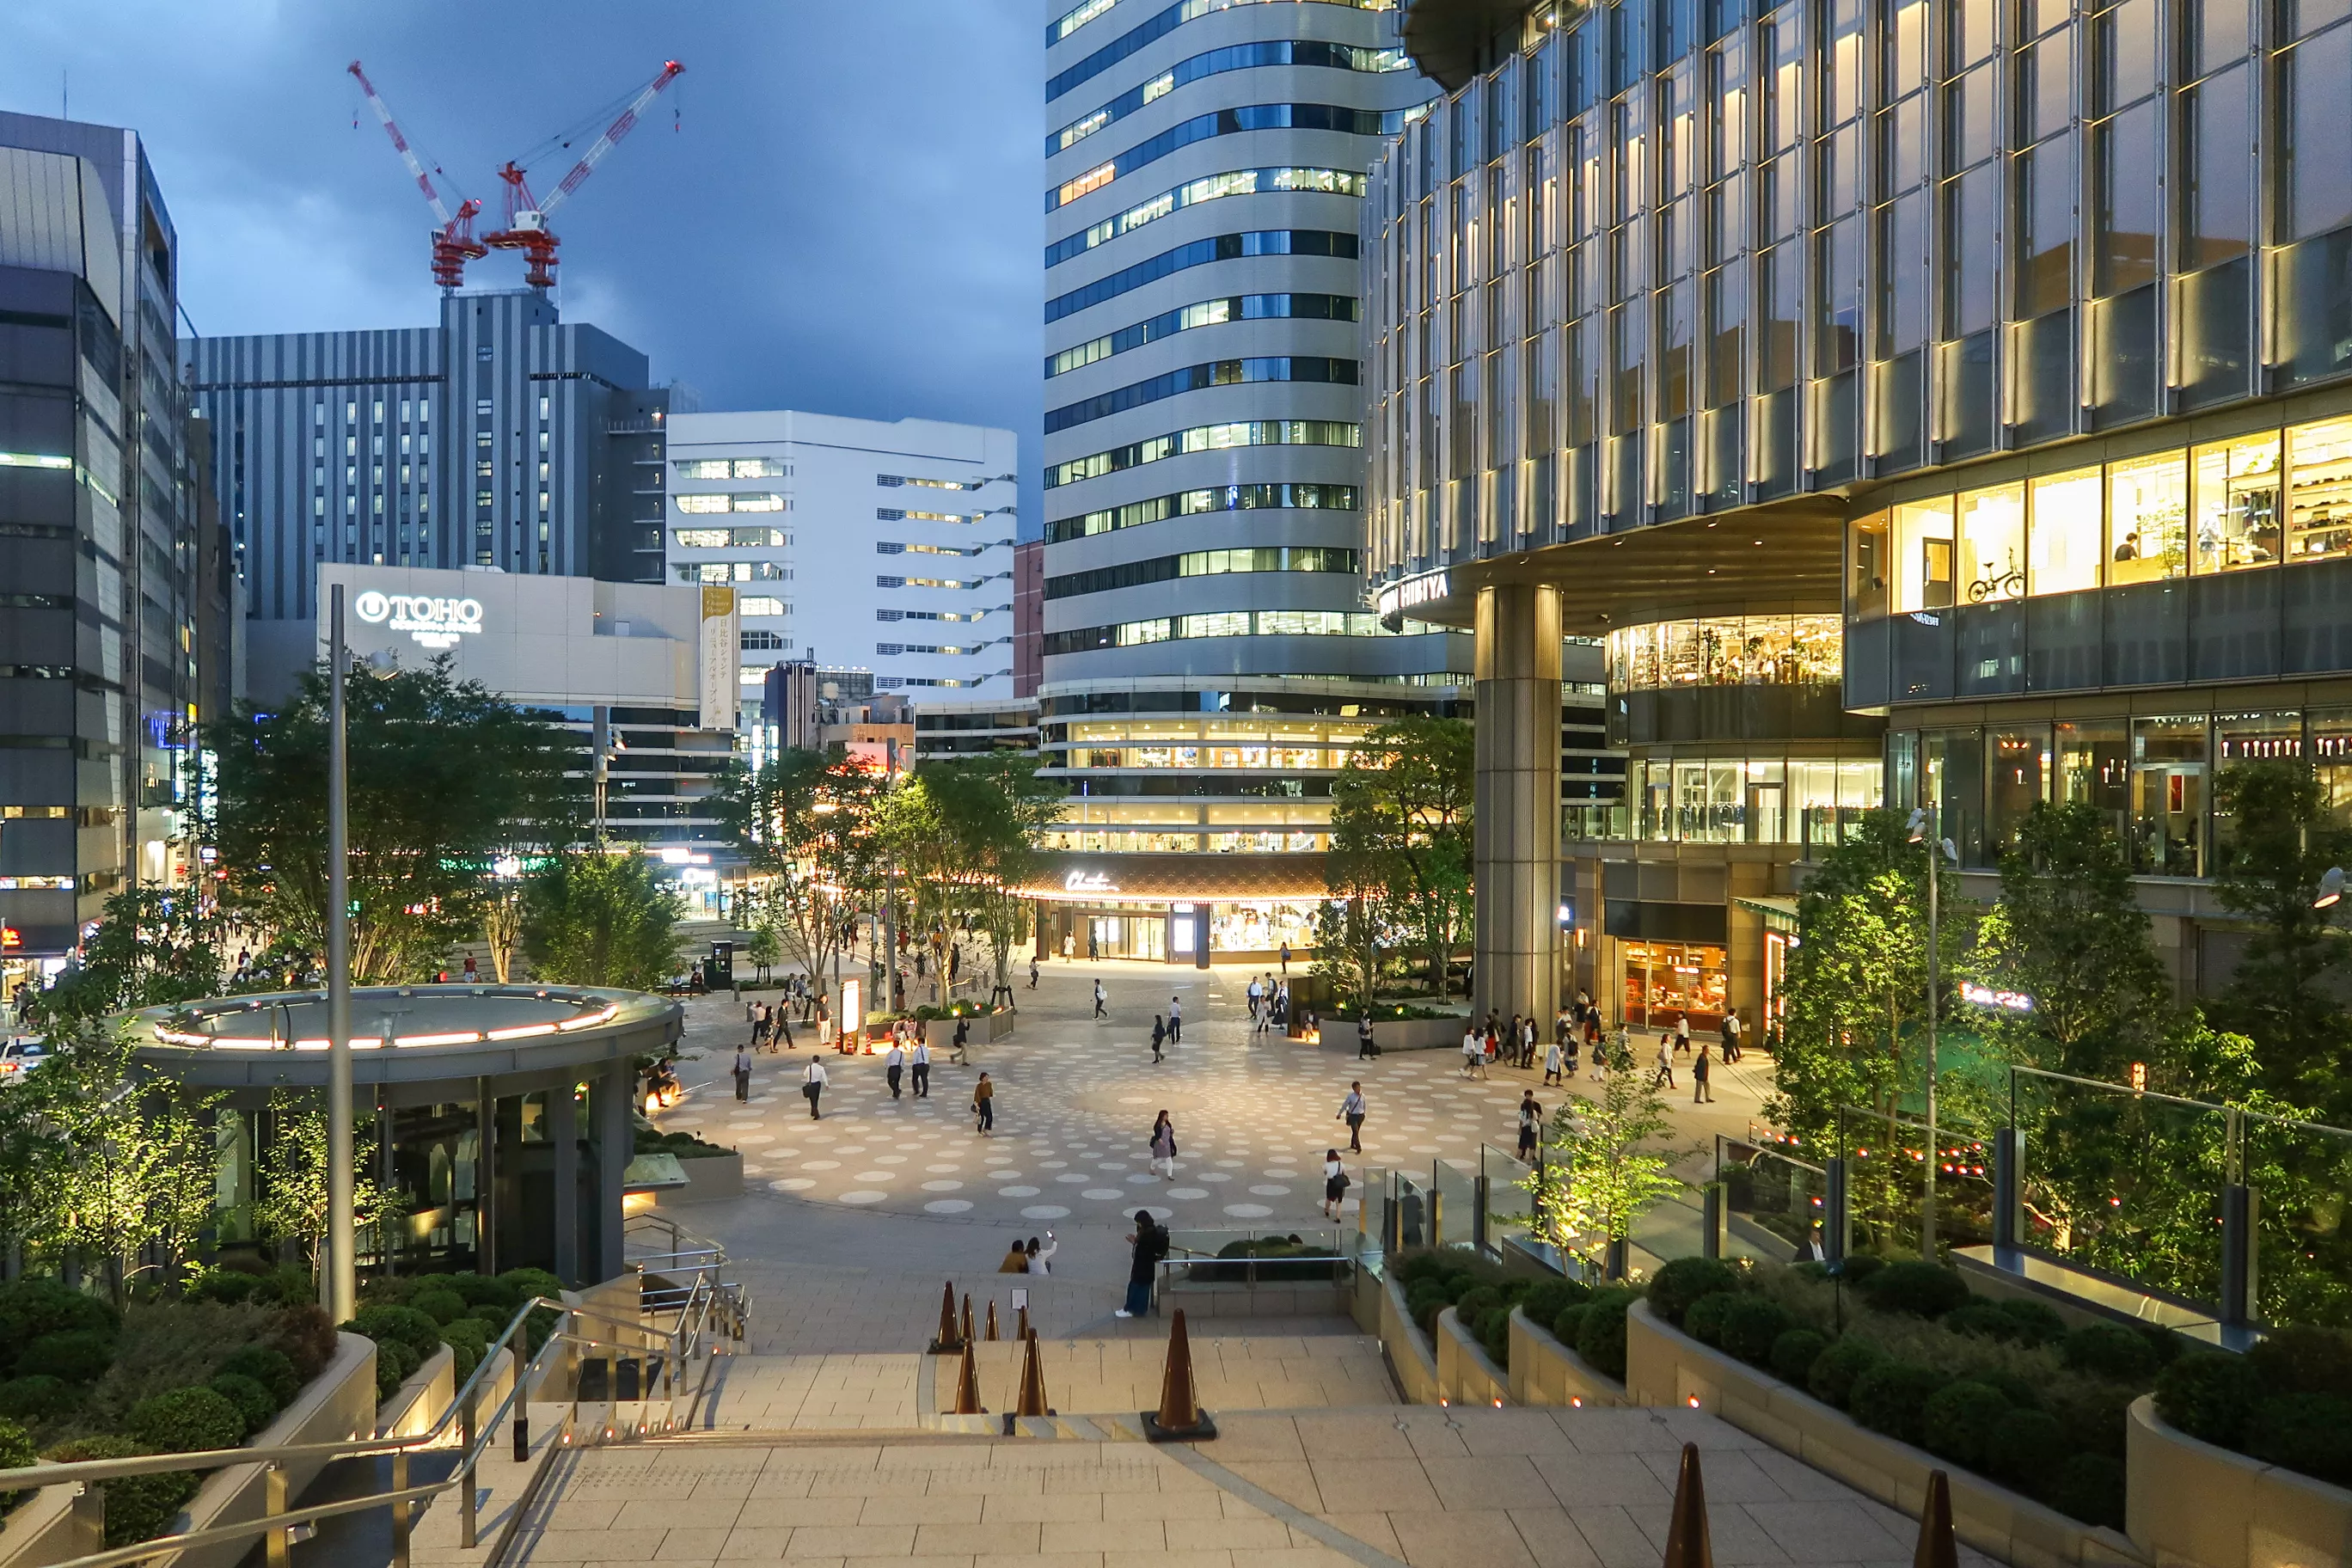 Tokyo-Midtown in Japan, East Asia | Architecture - Rated 3.5